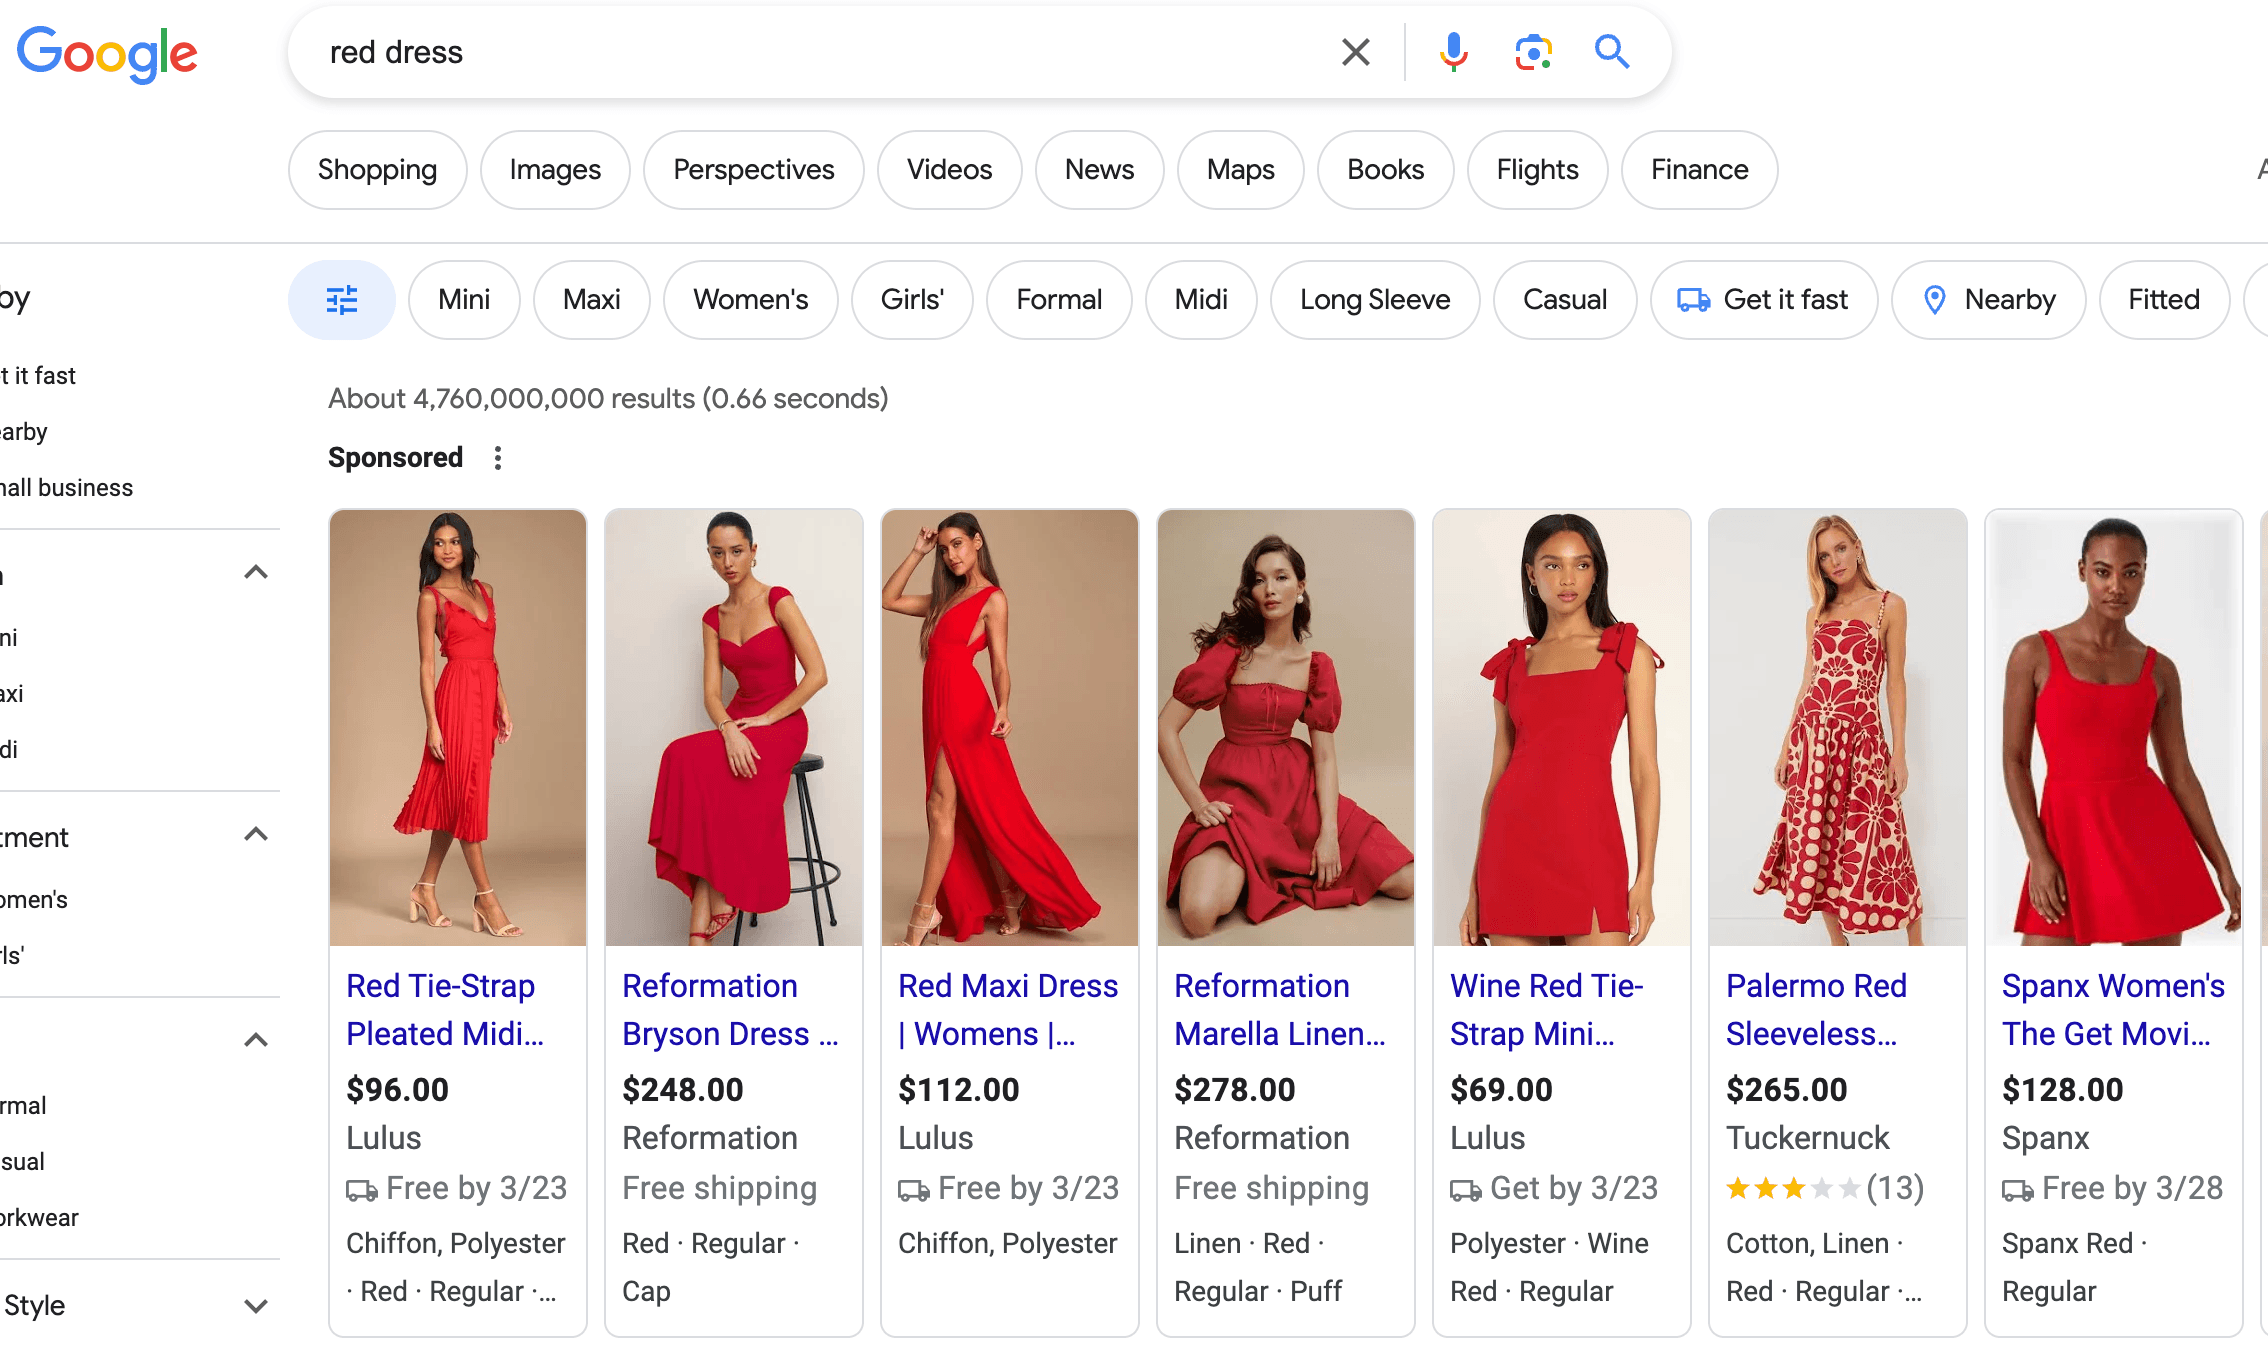 google ads example red dress